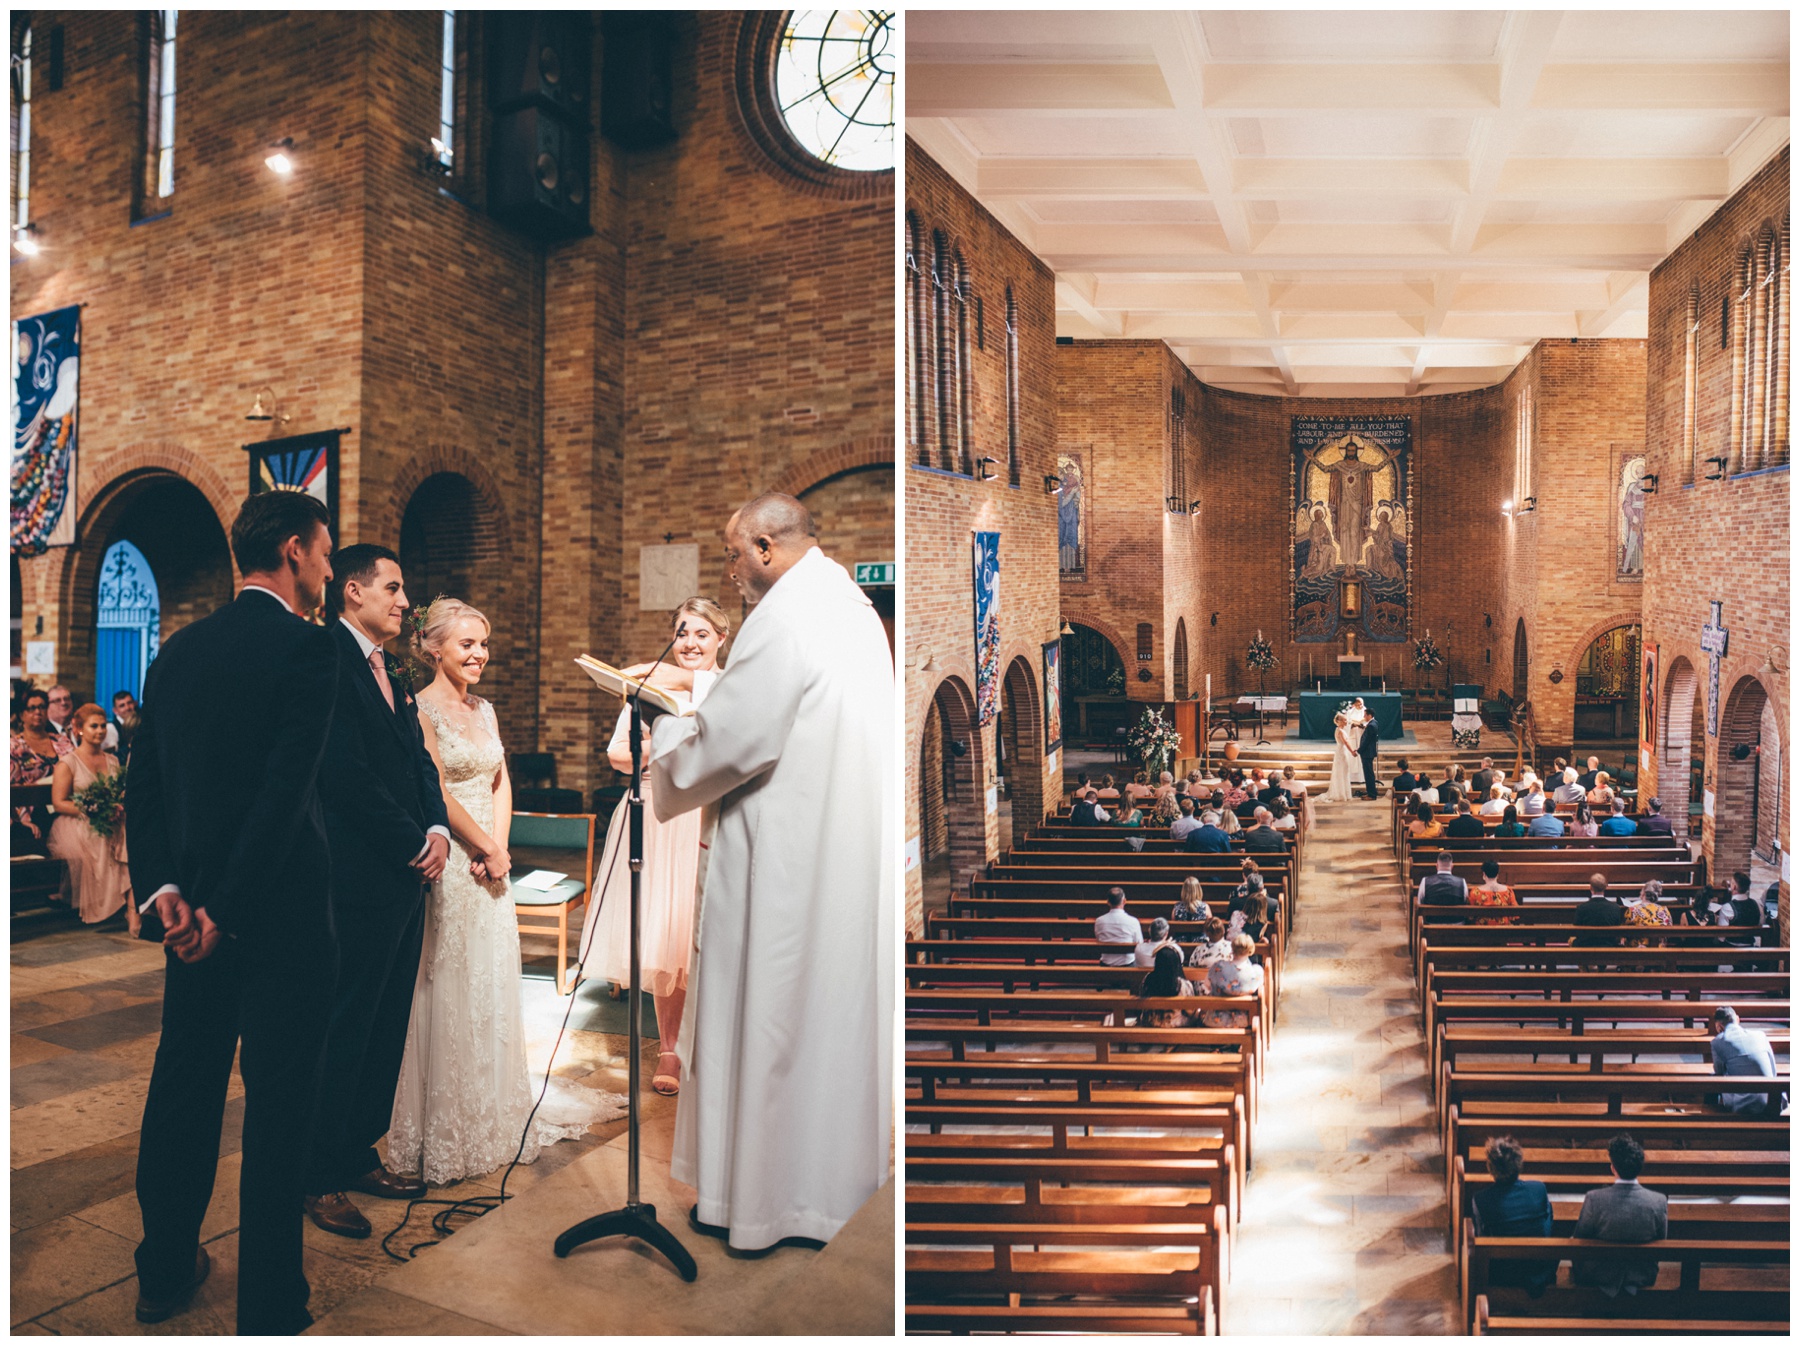 Bride and groom do their vows at Sacred Heart Church in Sheffield.